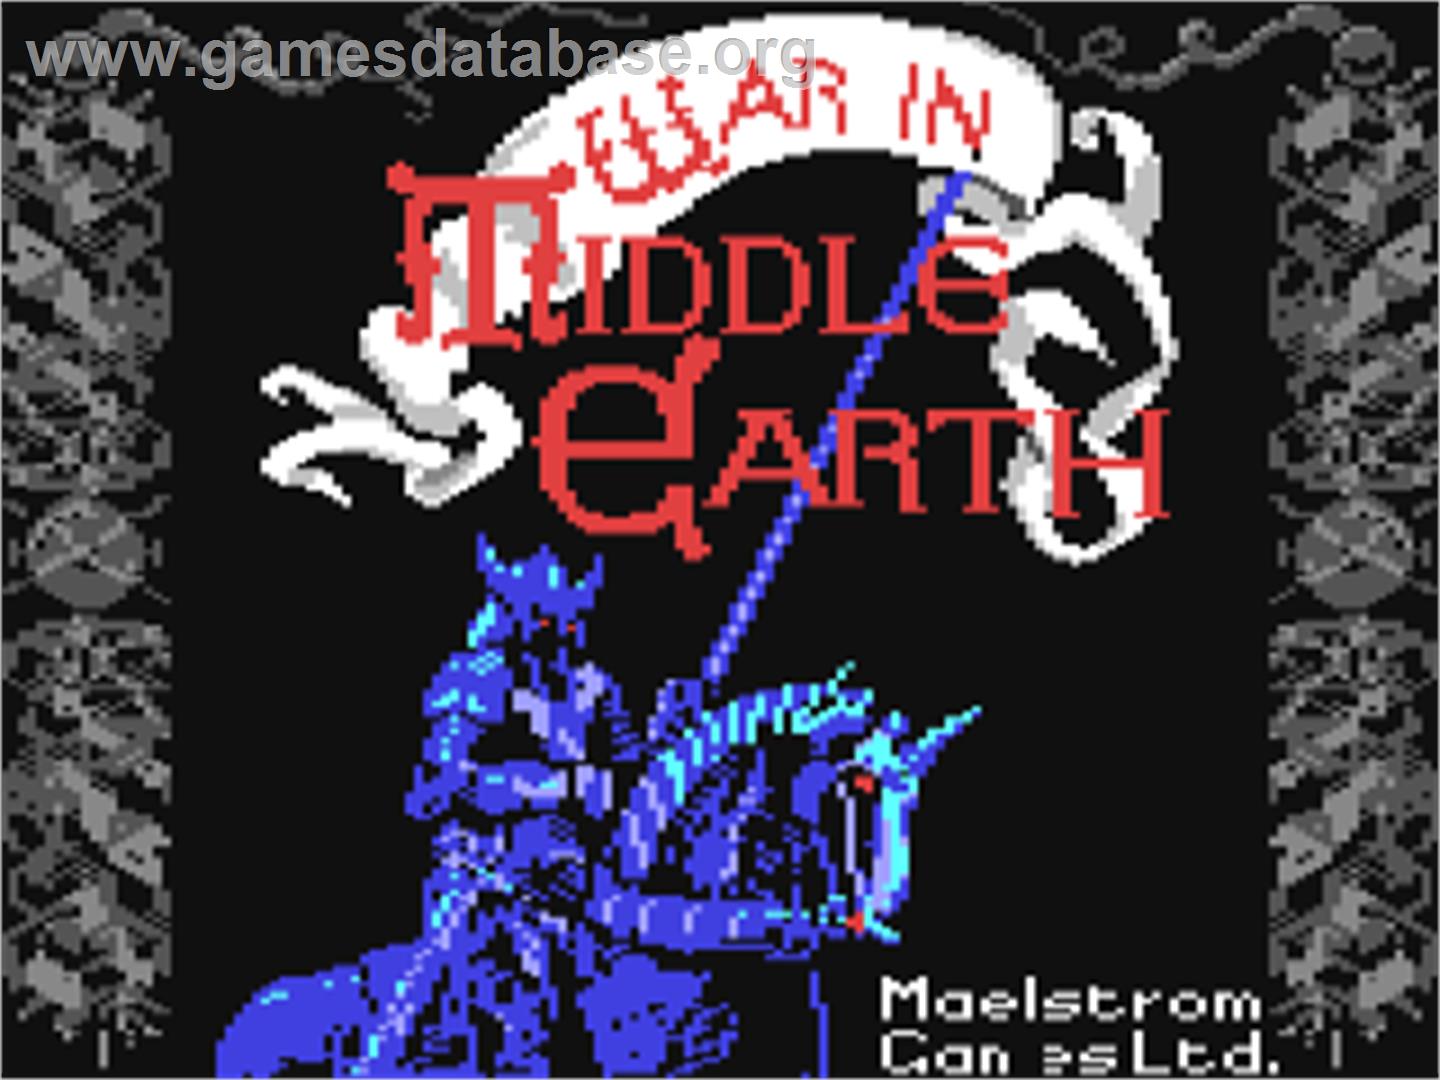 J.R.R. Tolkien's War in Middle Earth - Commodore 64 - Artwork - Title Screen